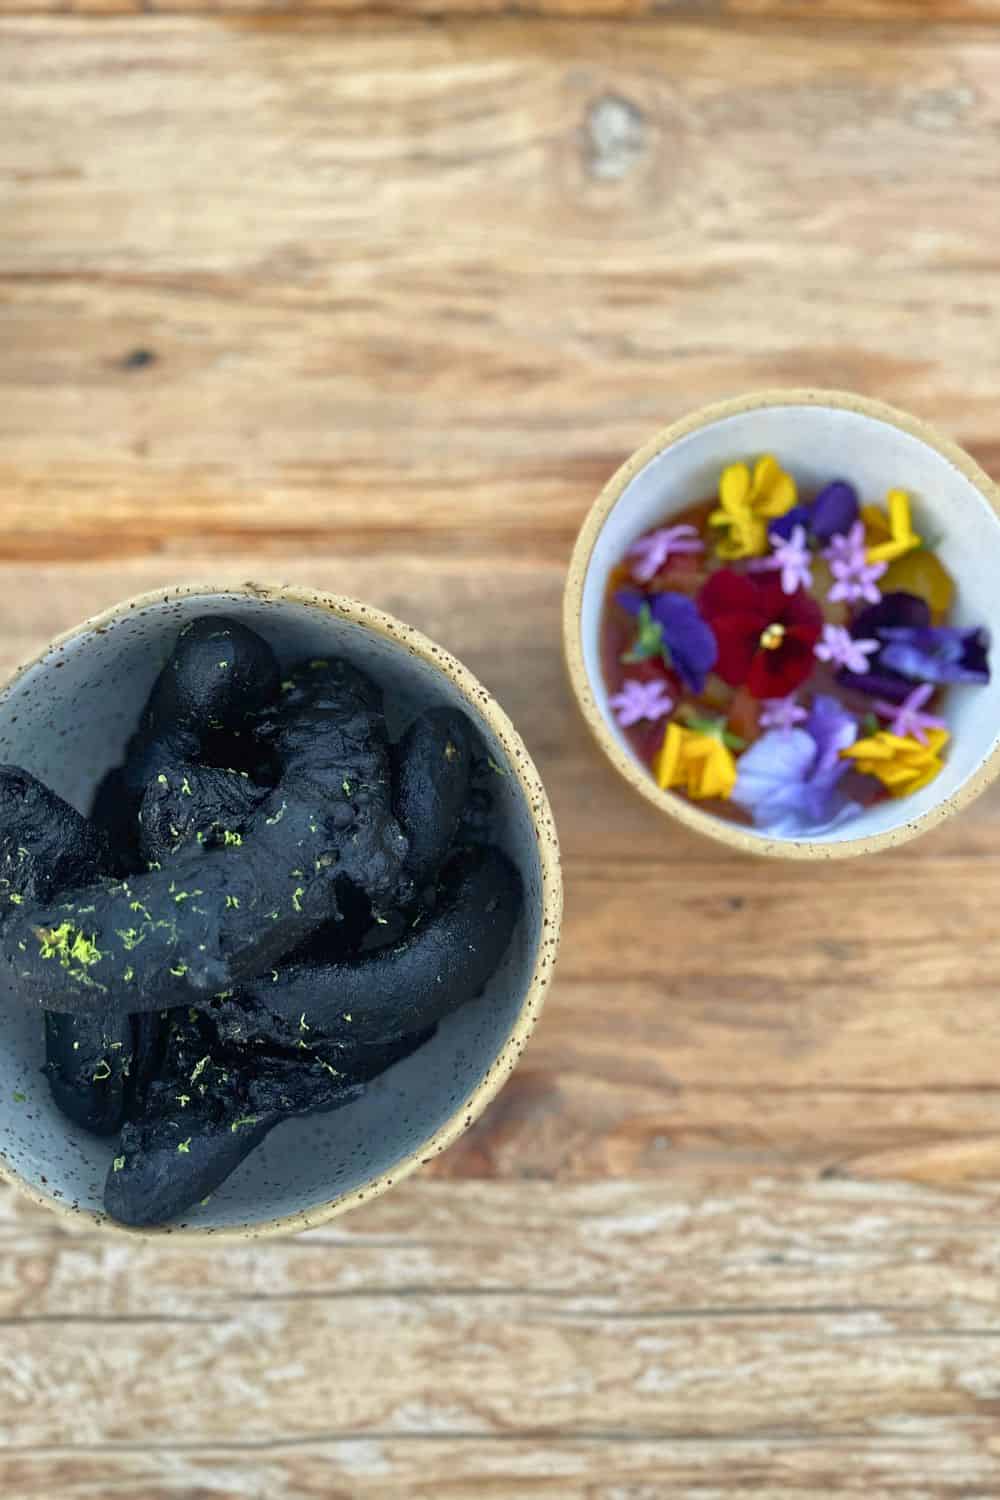 two bowls on a wooden surface, one containing charcoal-black bread, the other filled with a variety of colorful edible flowers in a clear broth, representing a contrast between dark and vividly colored culinary elements.